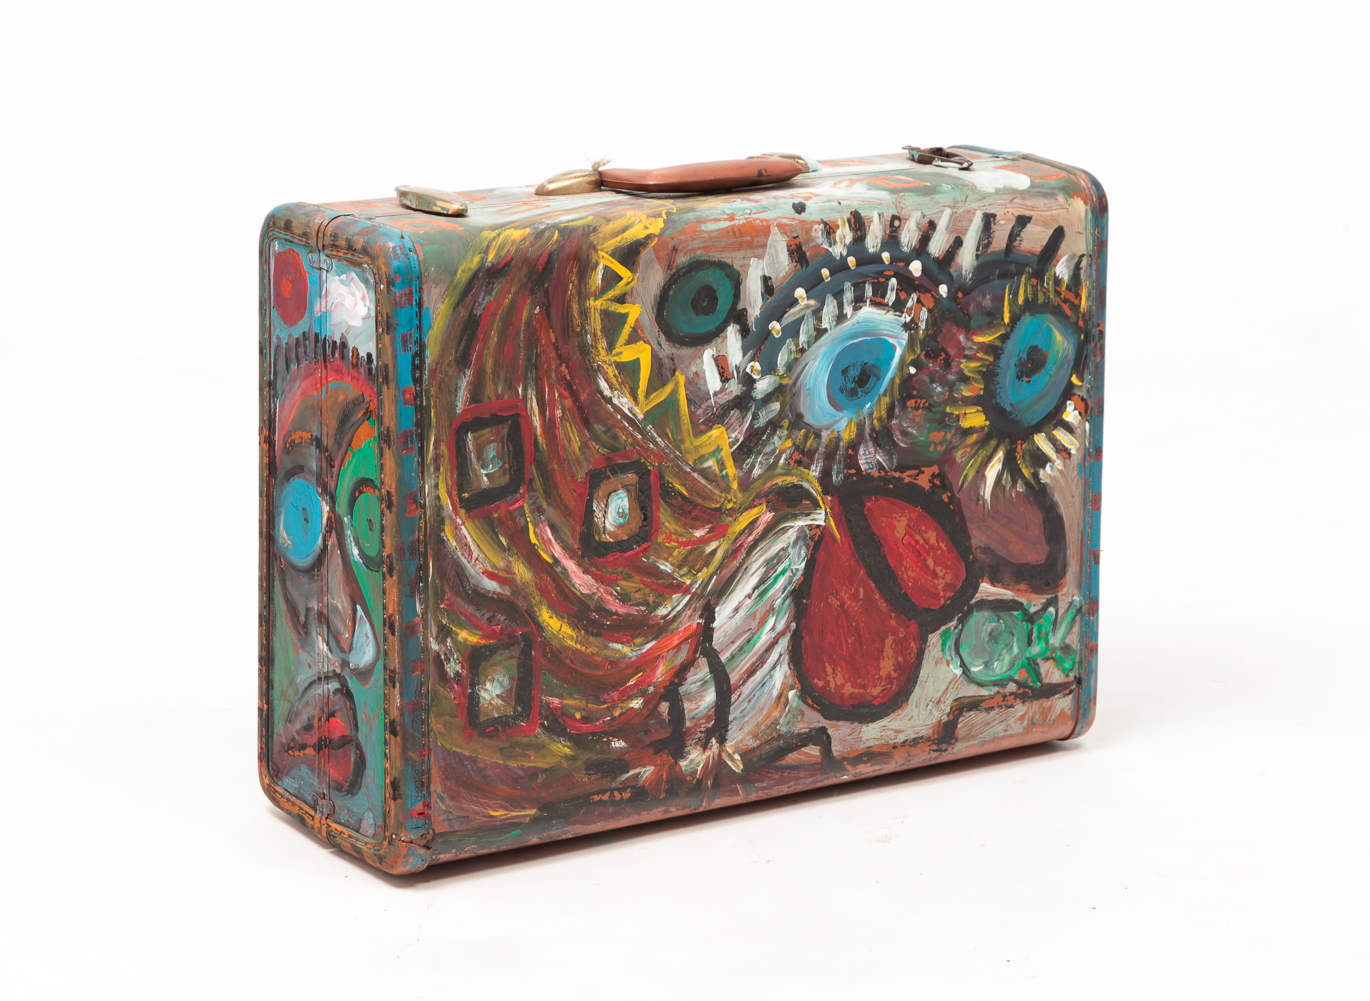 ROBERT WRIGHT PAINTED SUITCASE.